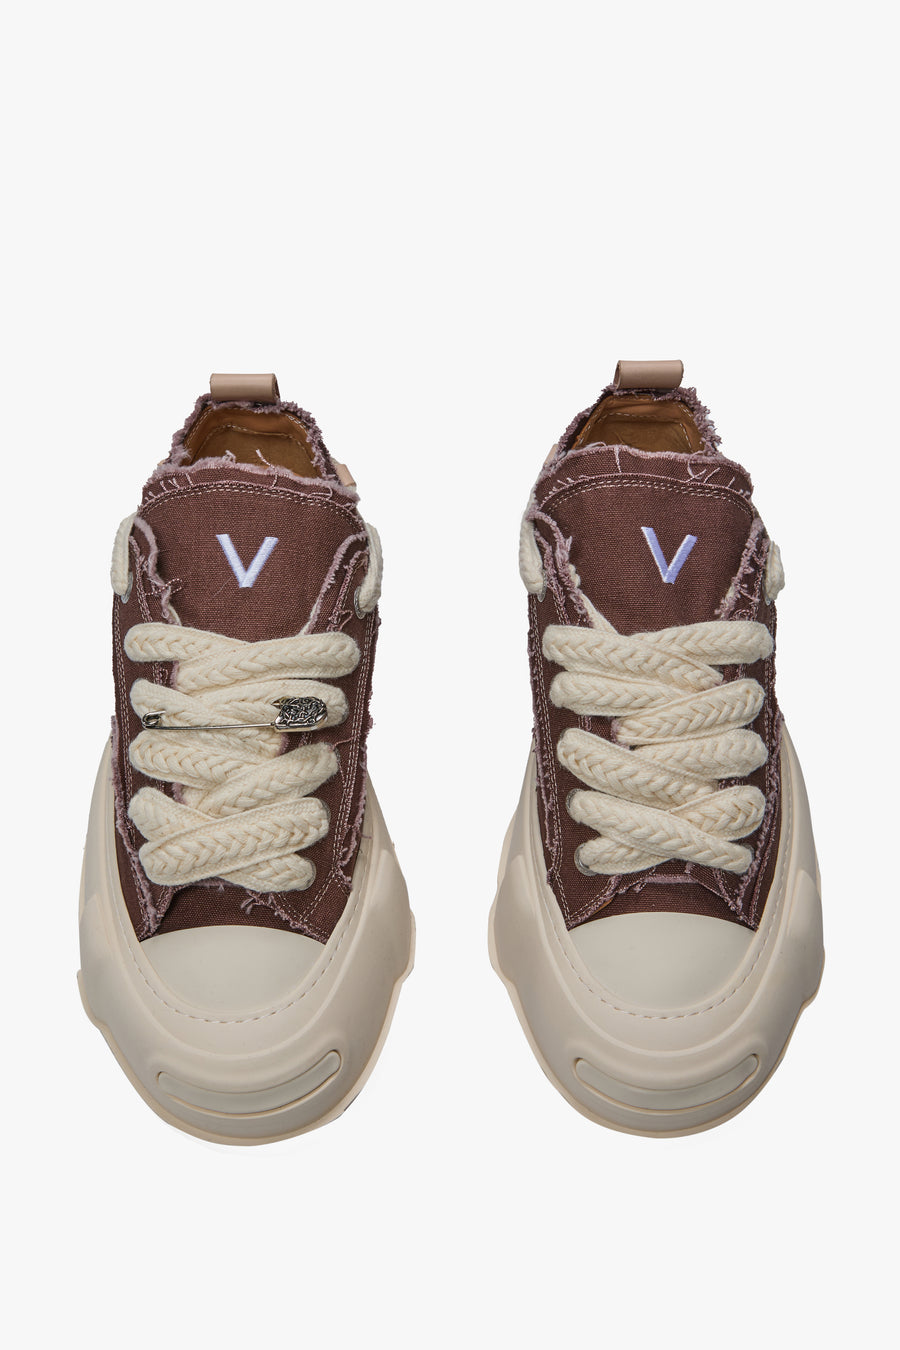 "VISION" BROWN SHOES